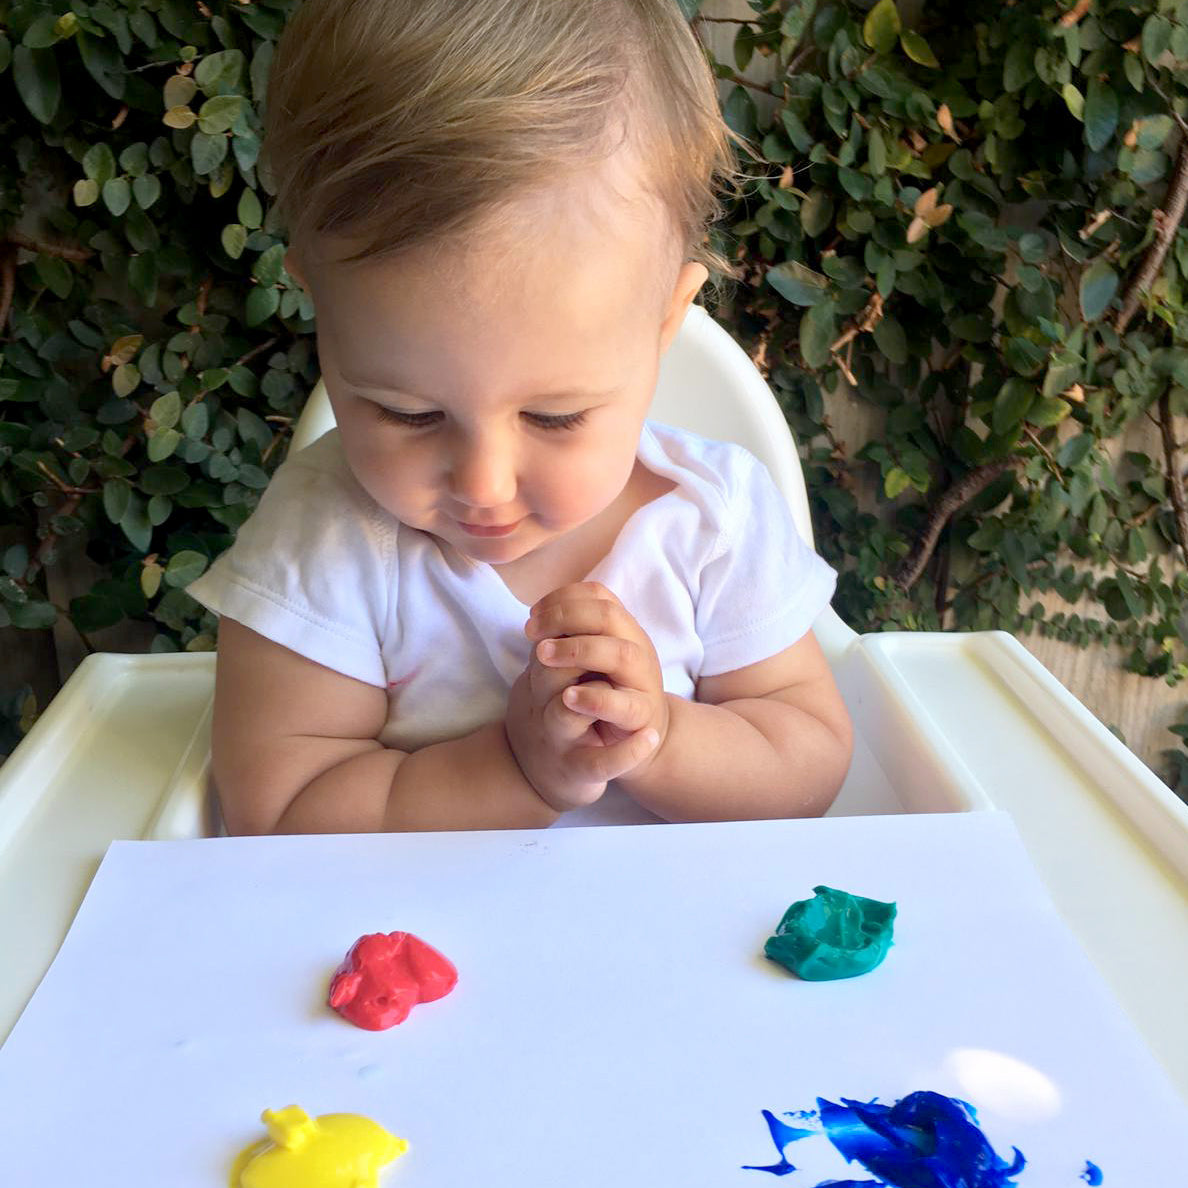 Is Painting Safe for Babies?